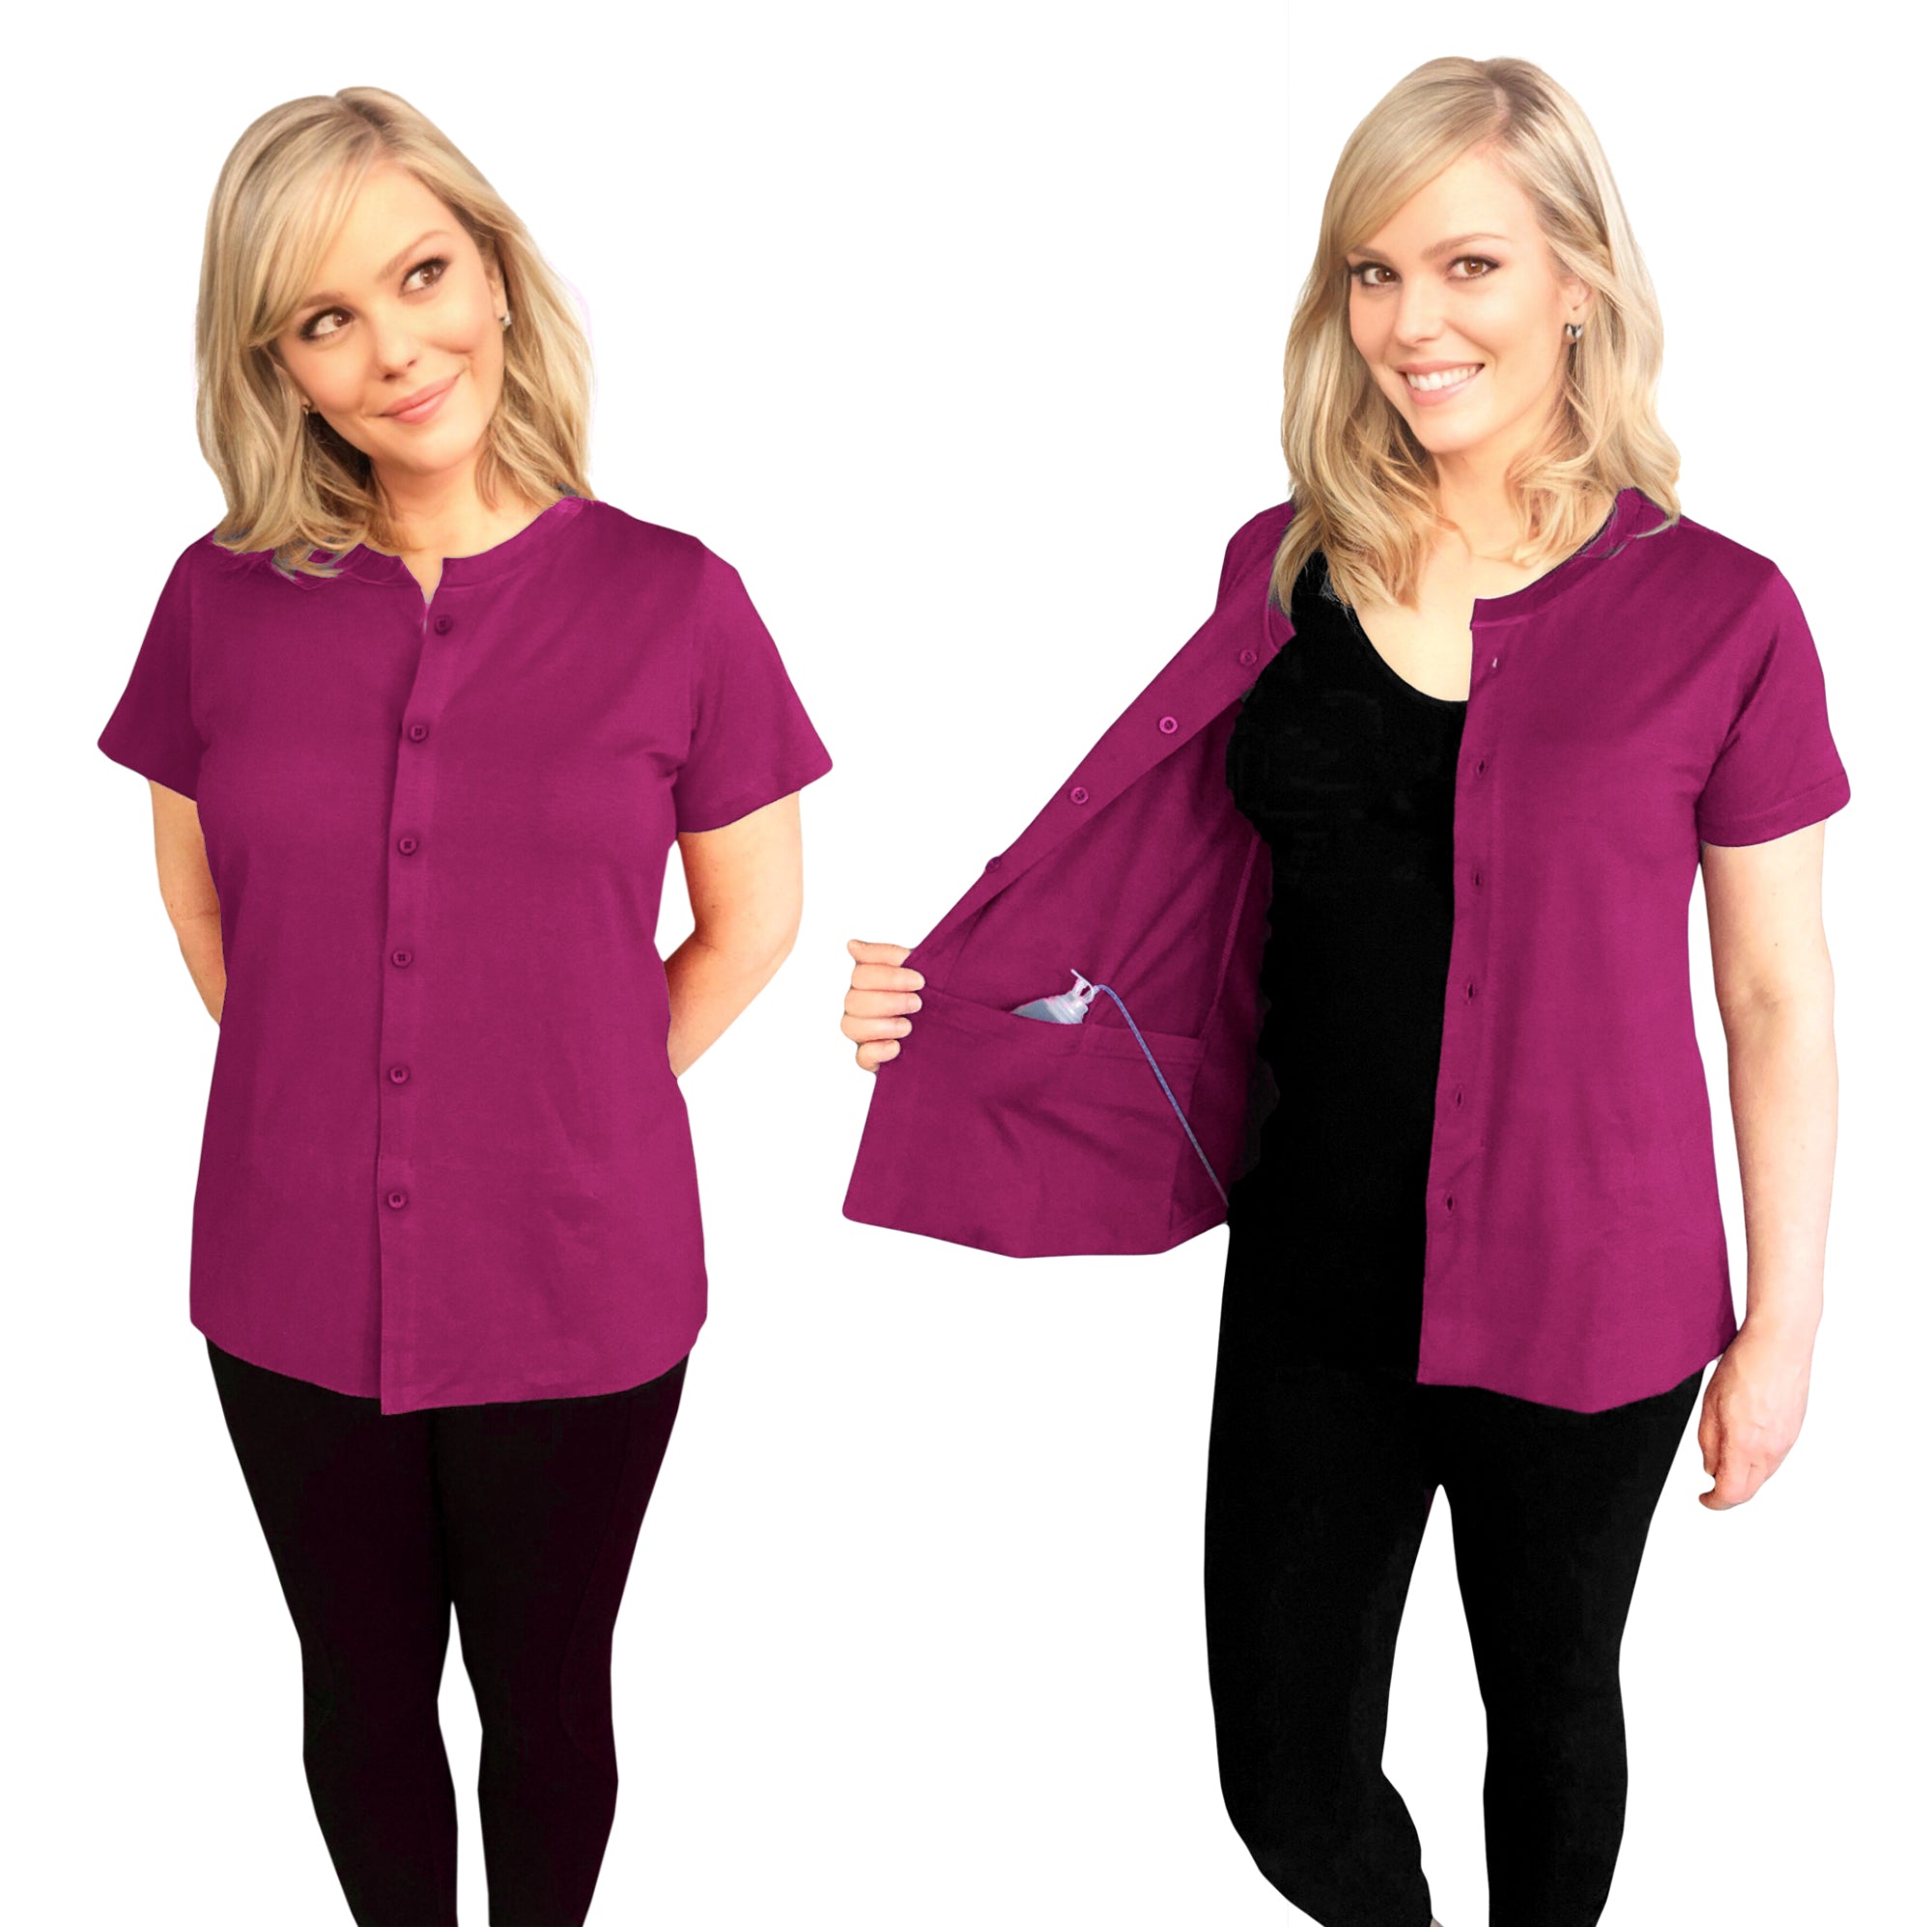 Post Mastectomy Band collar shirt with Drain pockets Camisole for Drain  Management Systems